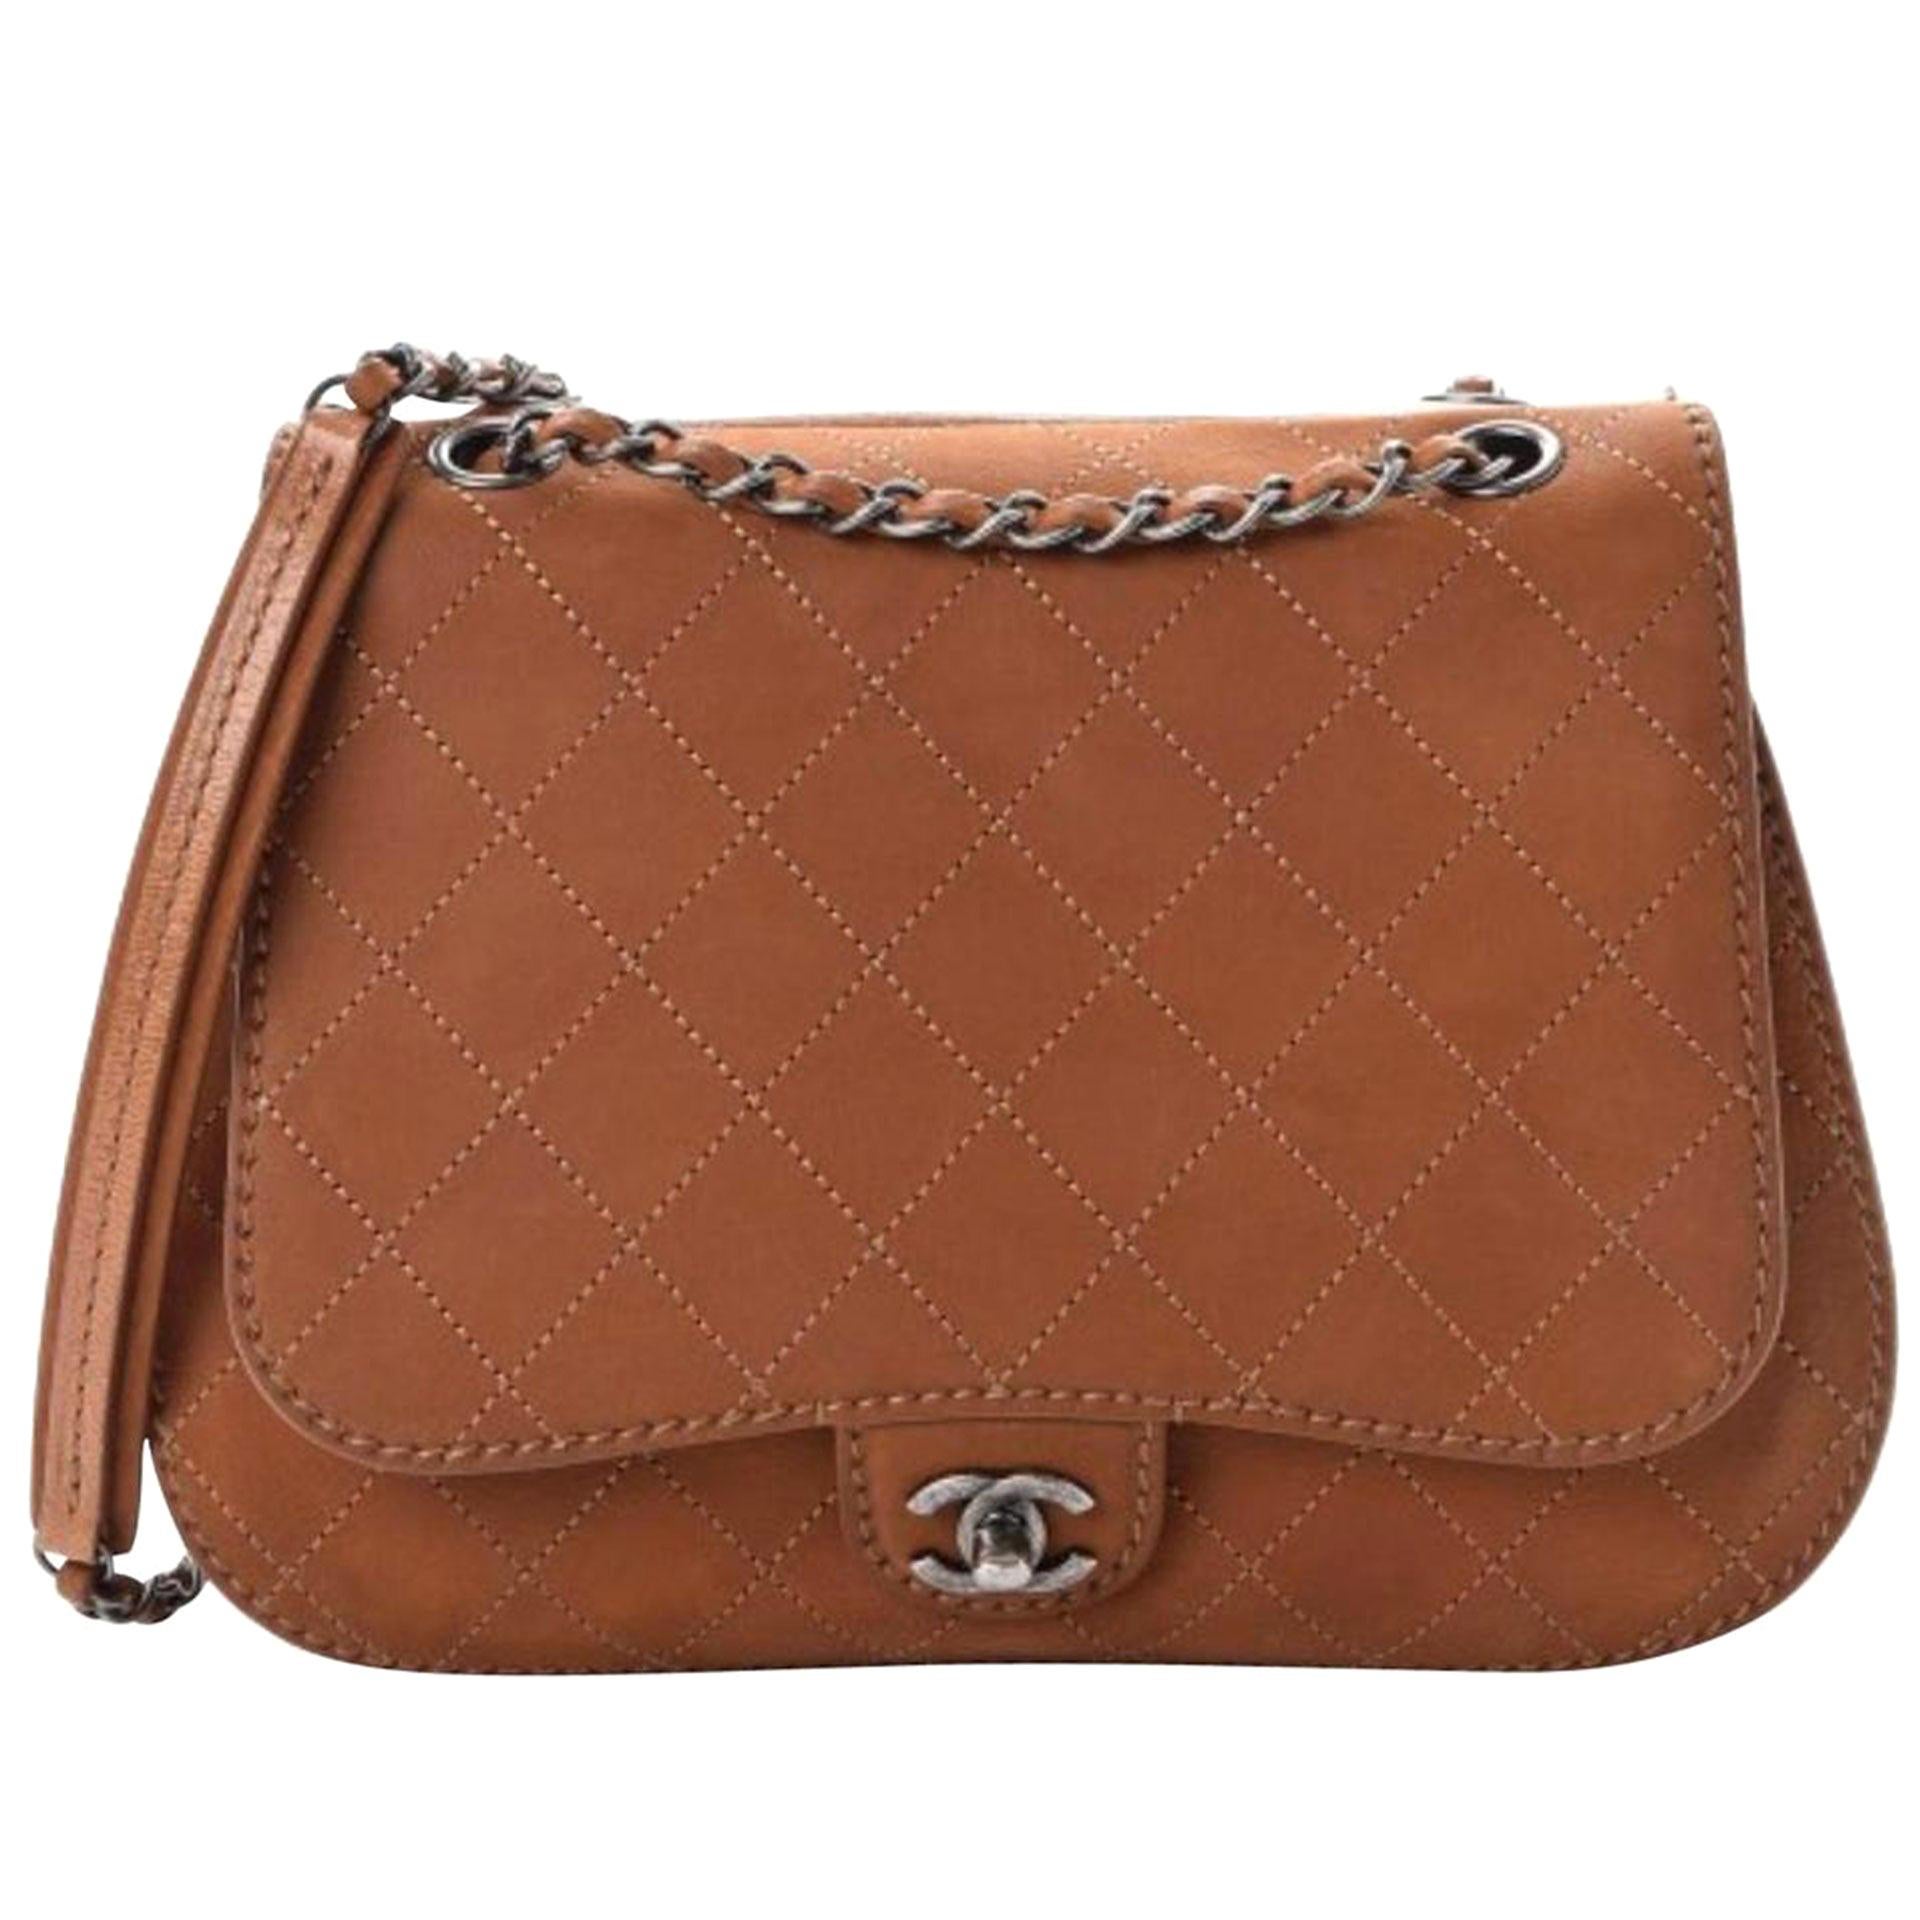 brown leather chanel bag